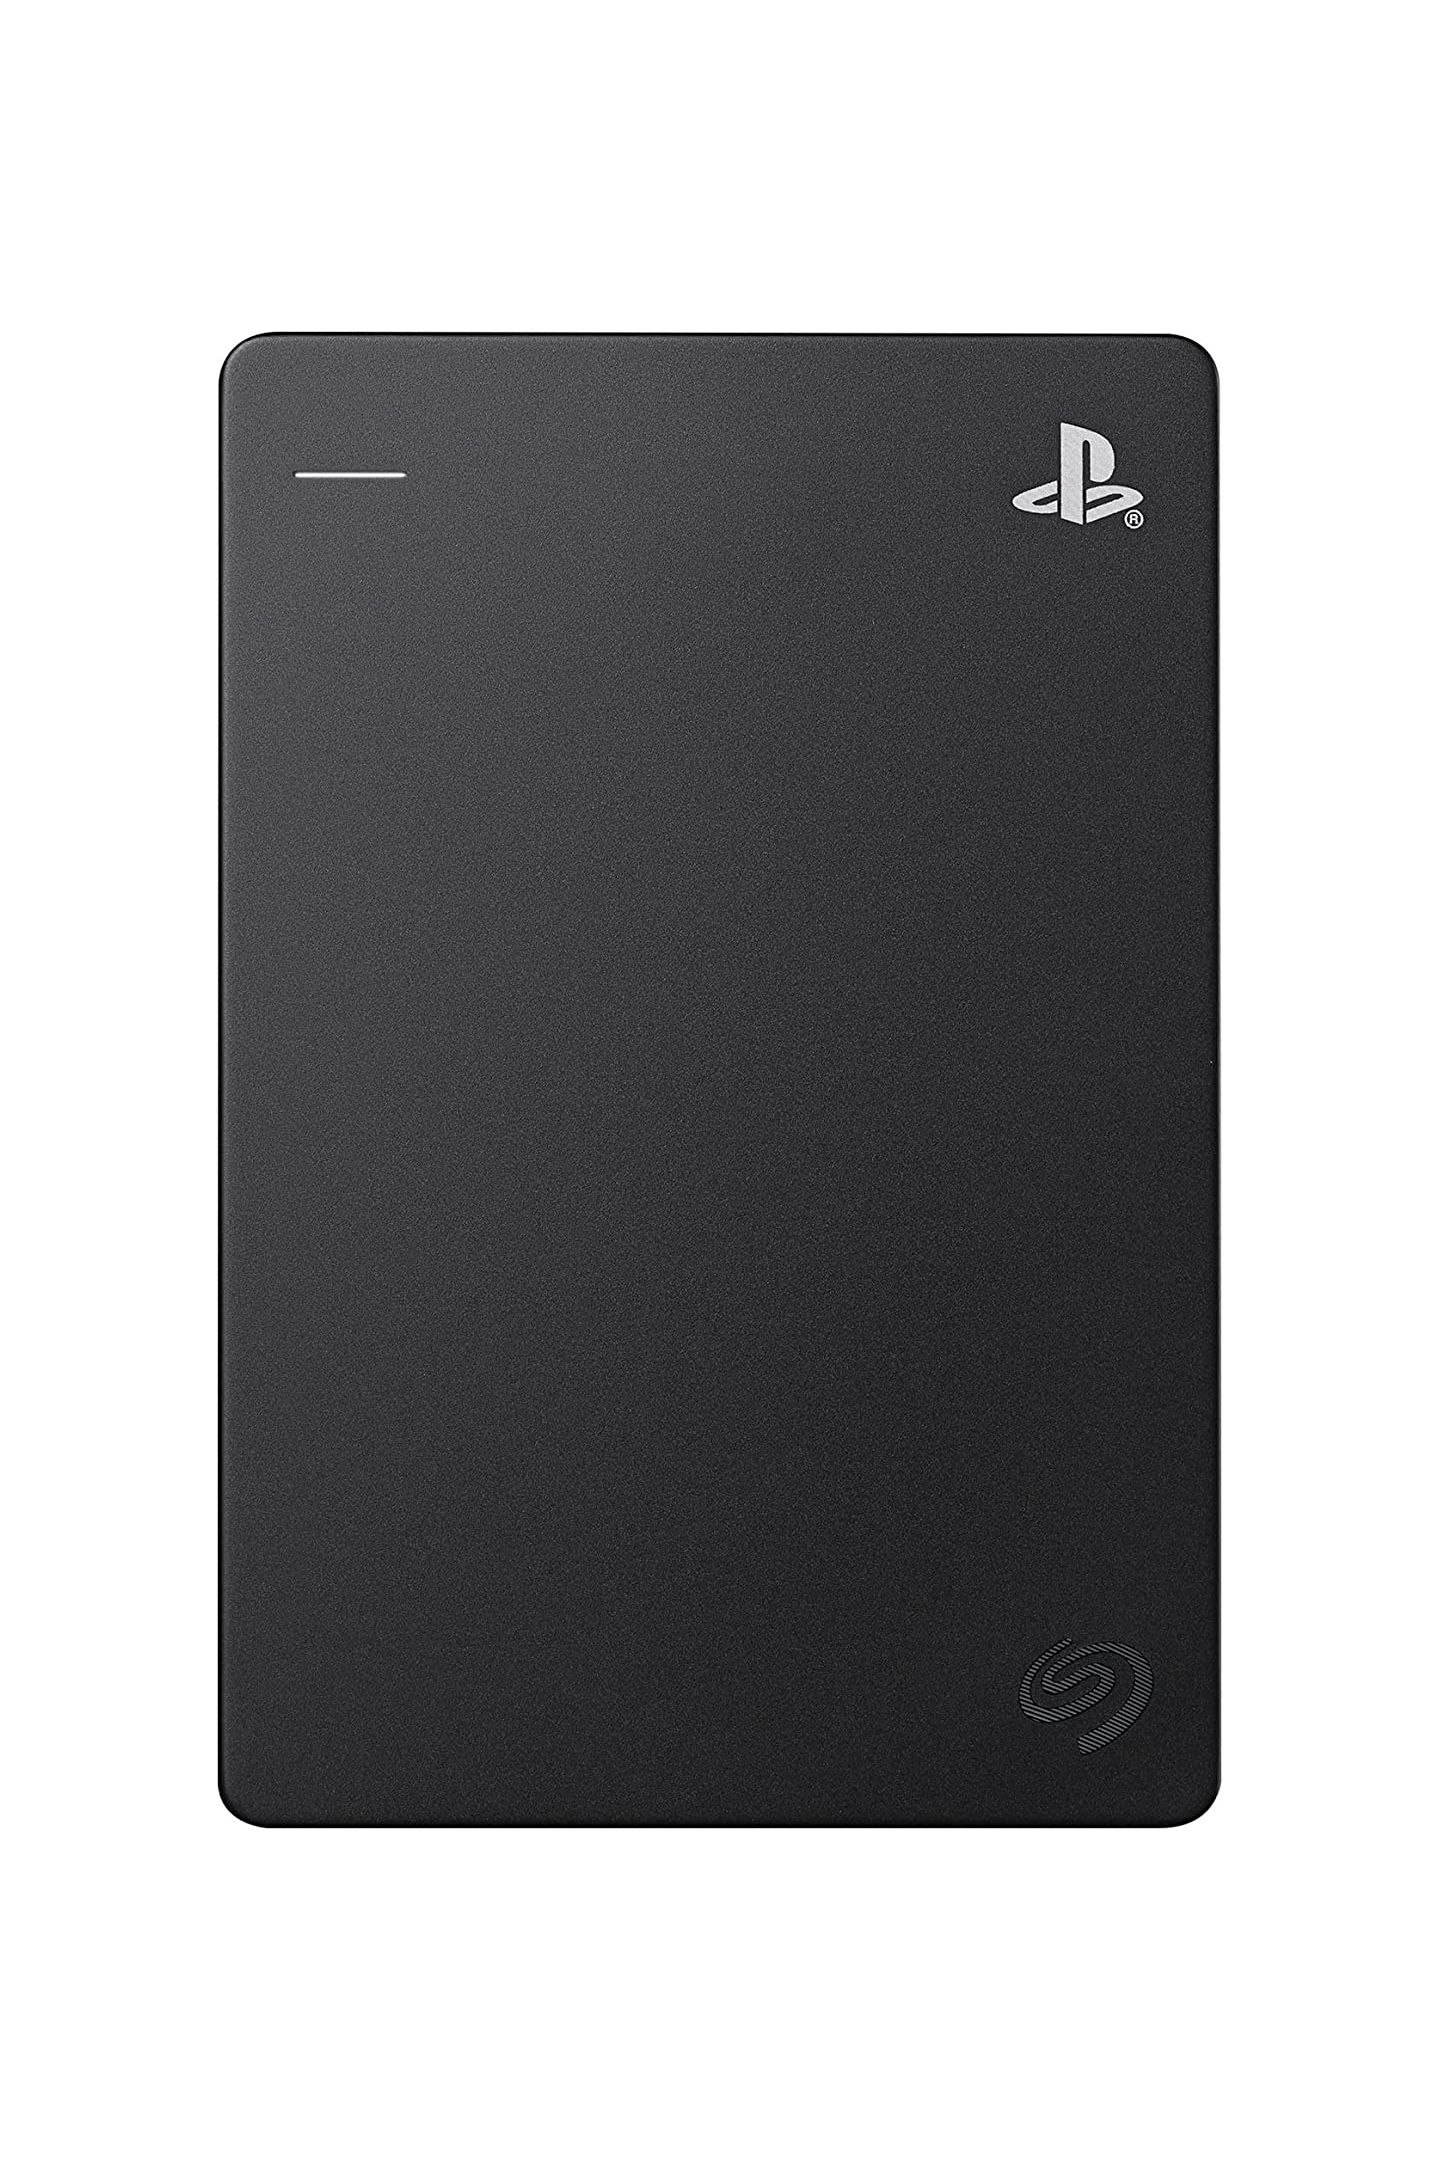 Seagate Game Drive for Playstation Consoles 4TB External Hard Drive